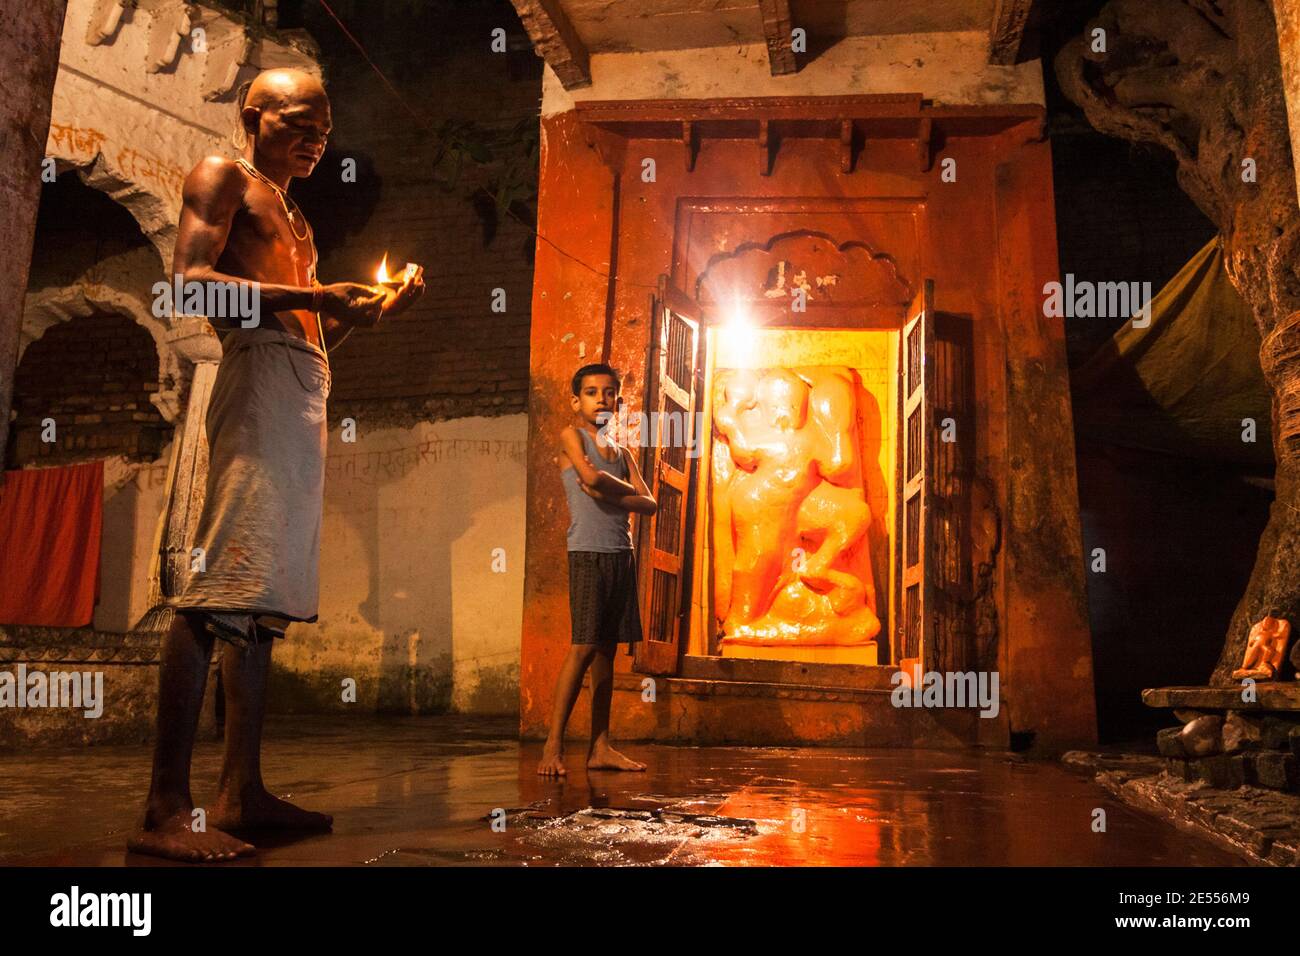 Chitrakoot, Madhya Pradesh, India : A priests holds a candle by a child inside a Hanuman shrine at night. Stock Photo